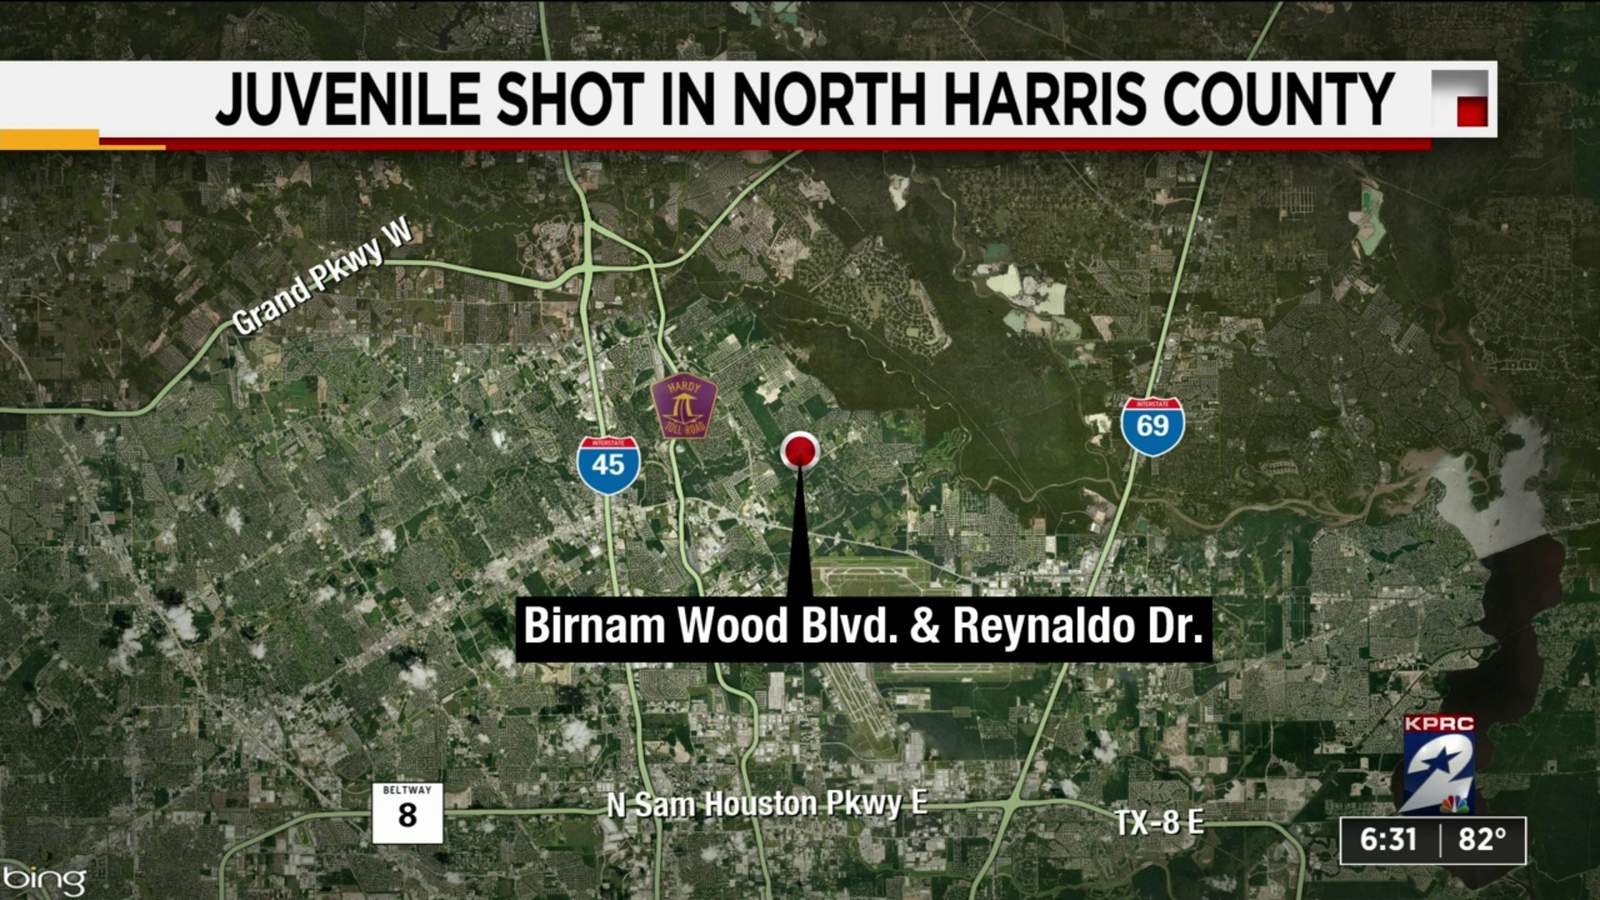 Investigation underway after juvenile shot in north Harris County, deputies say